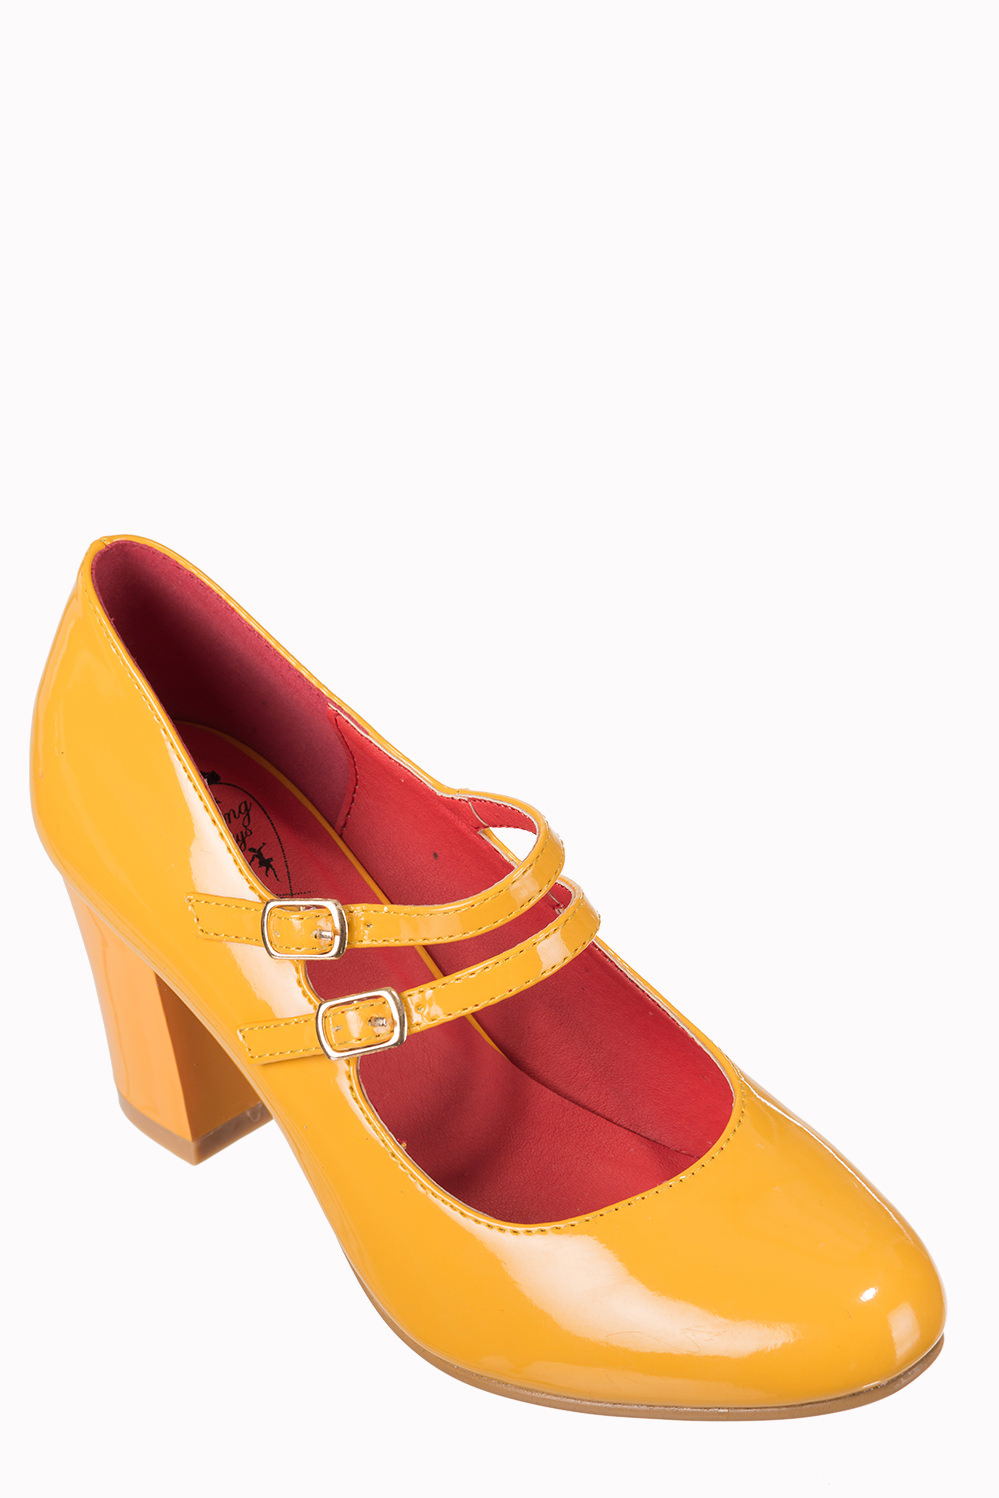 mustard mary jane shoes